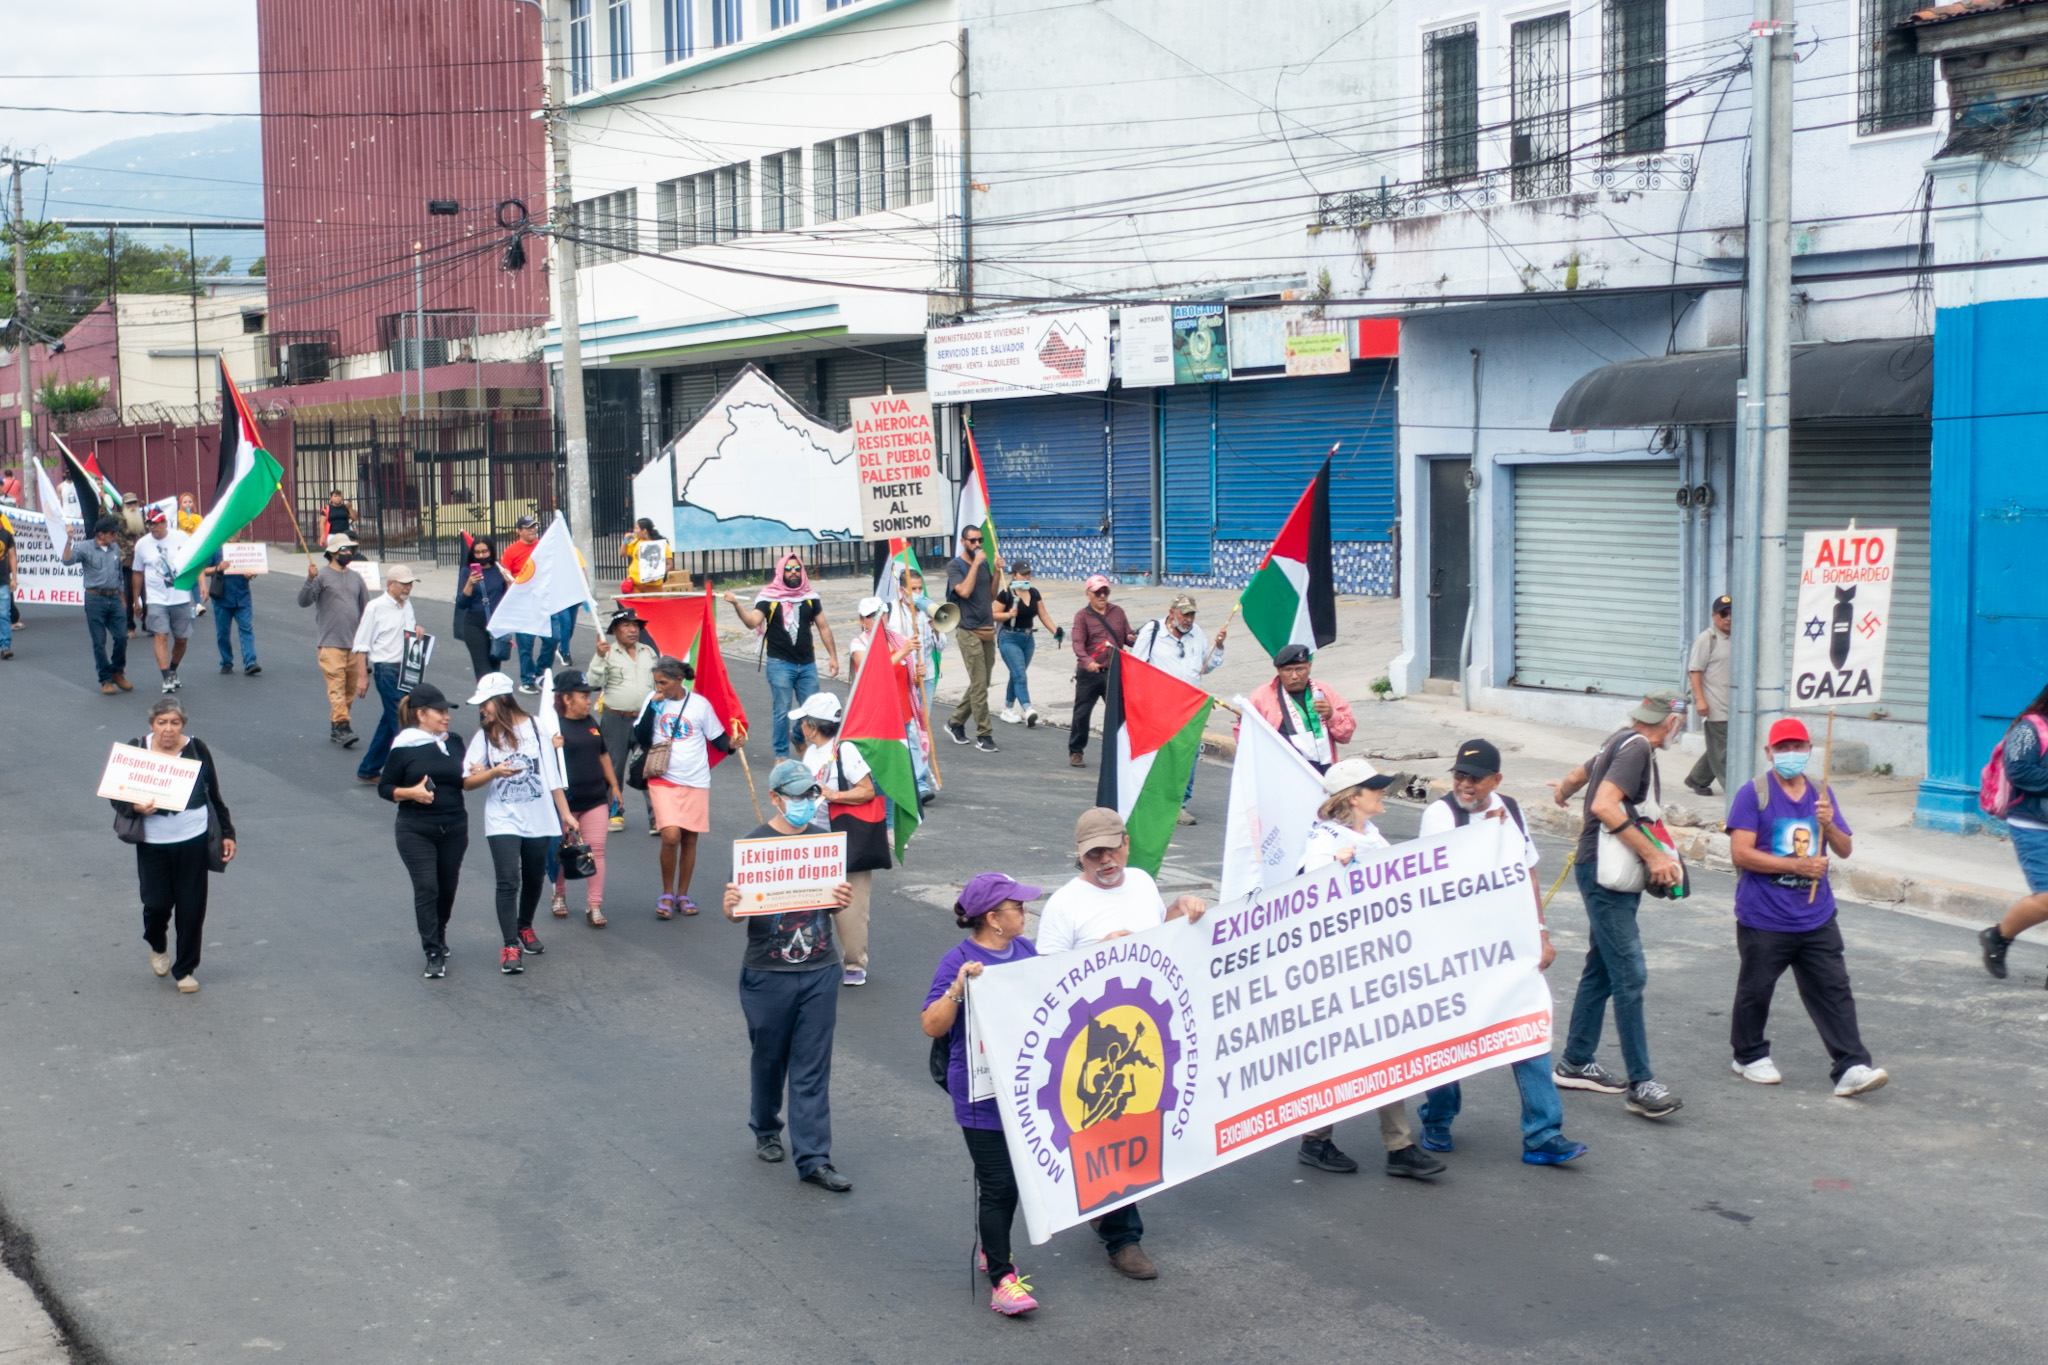 Fired Workers Movement members march with banner